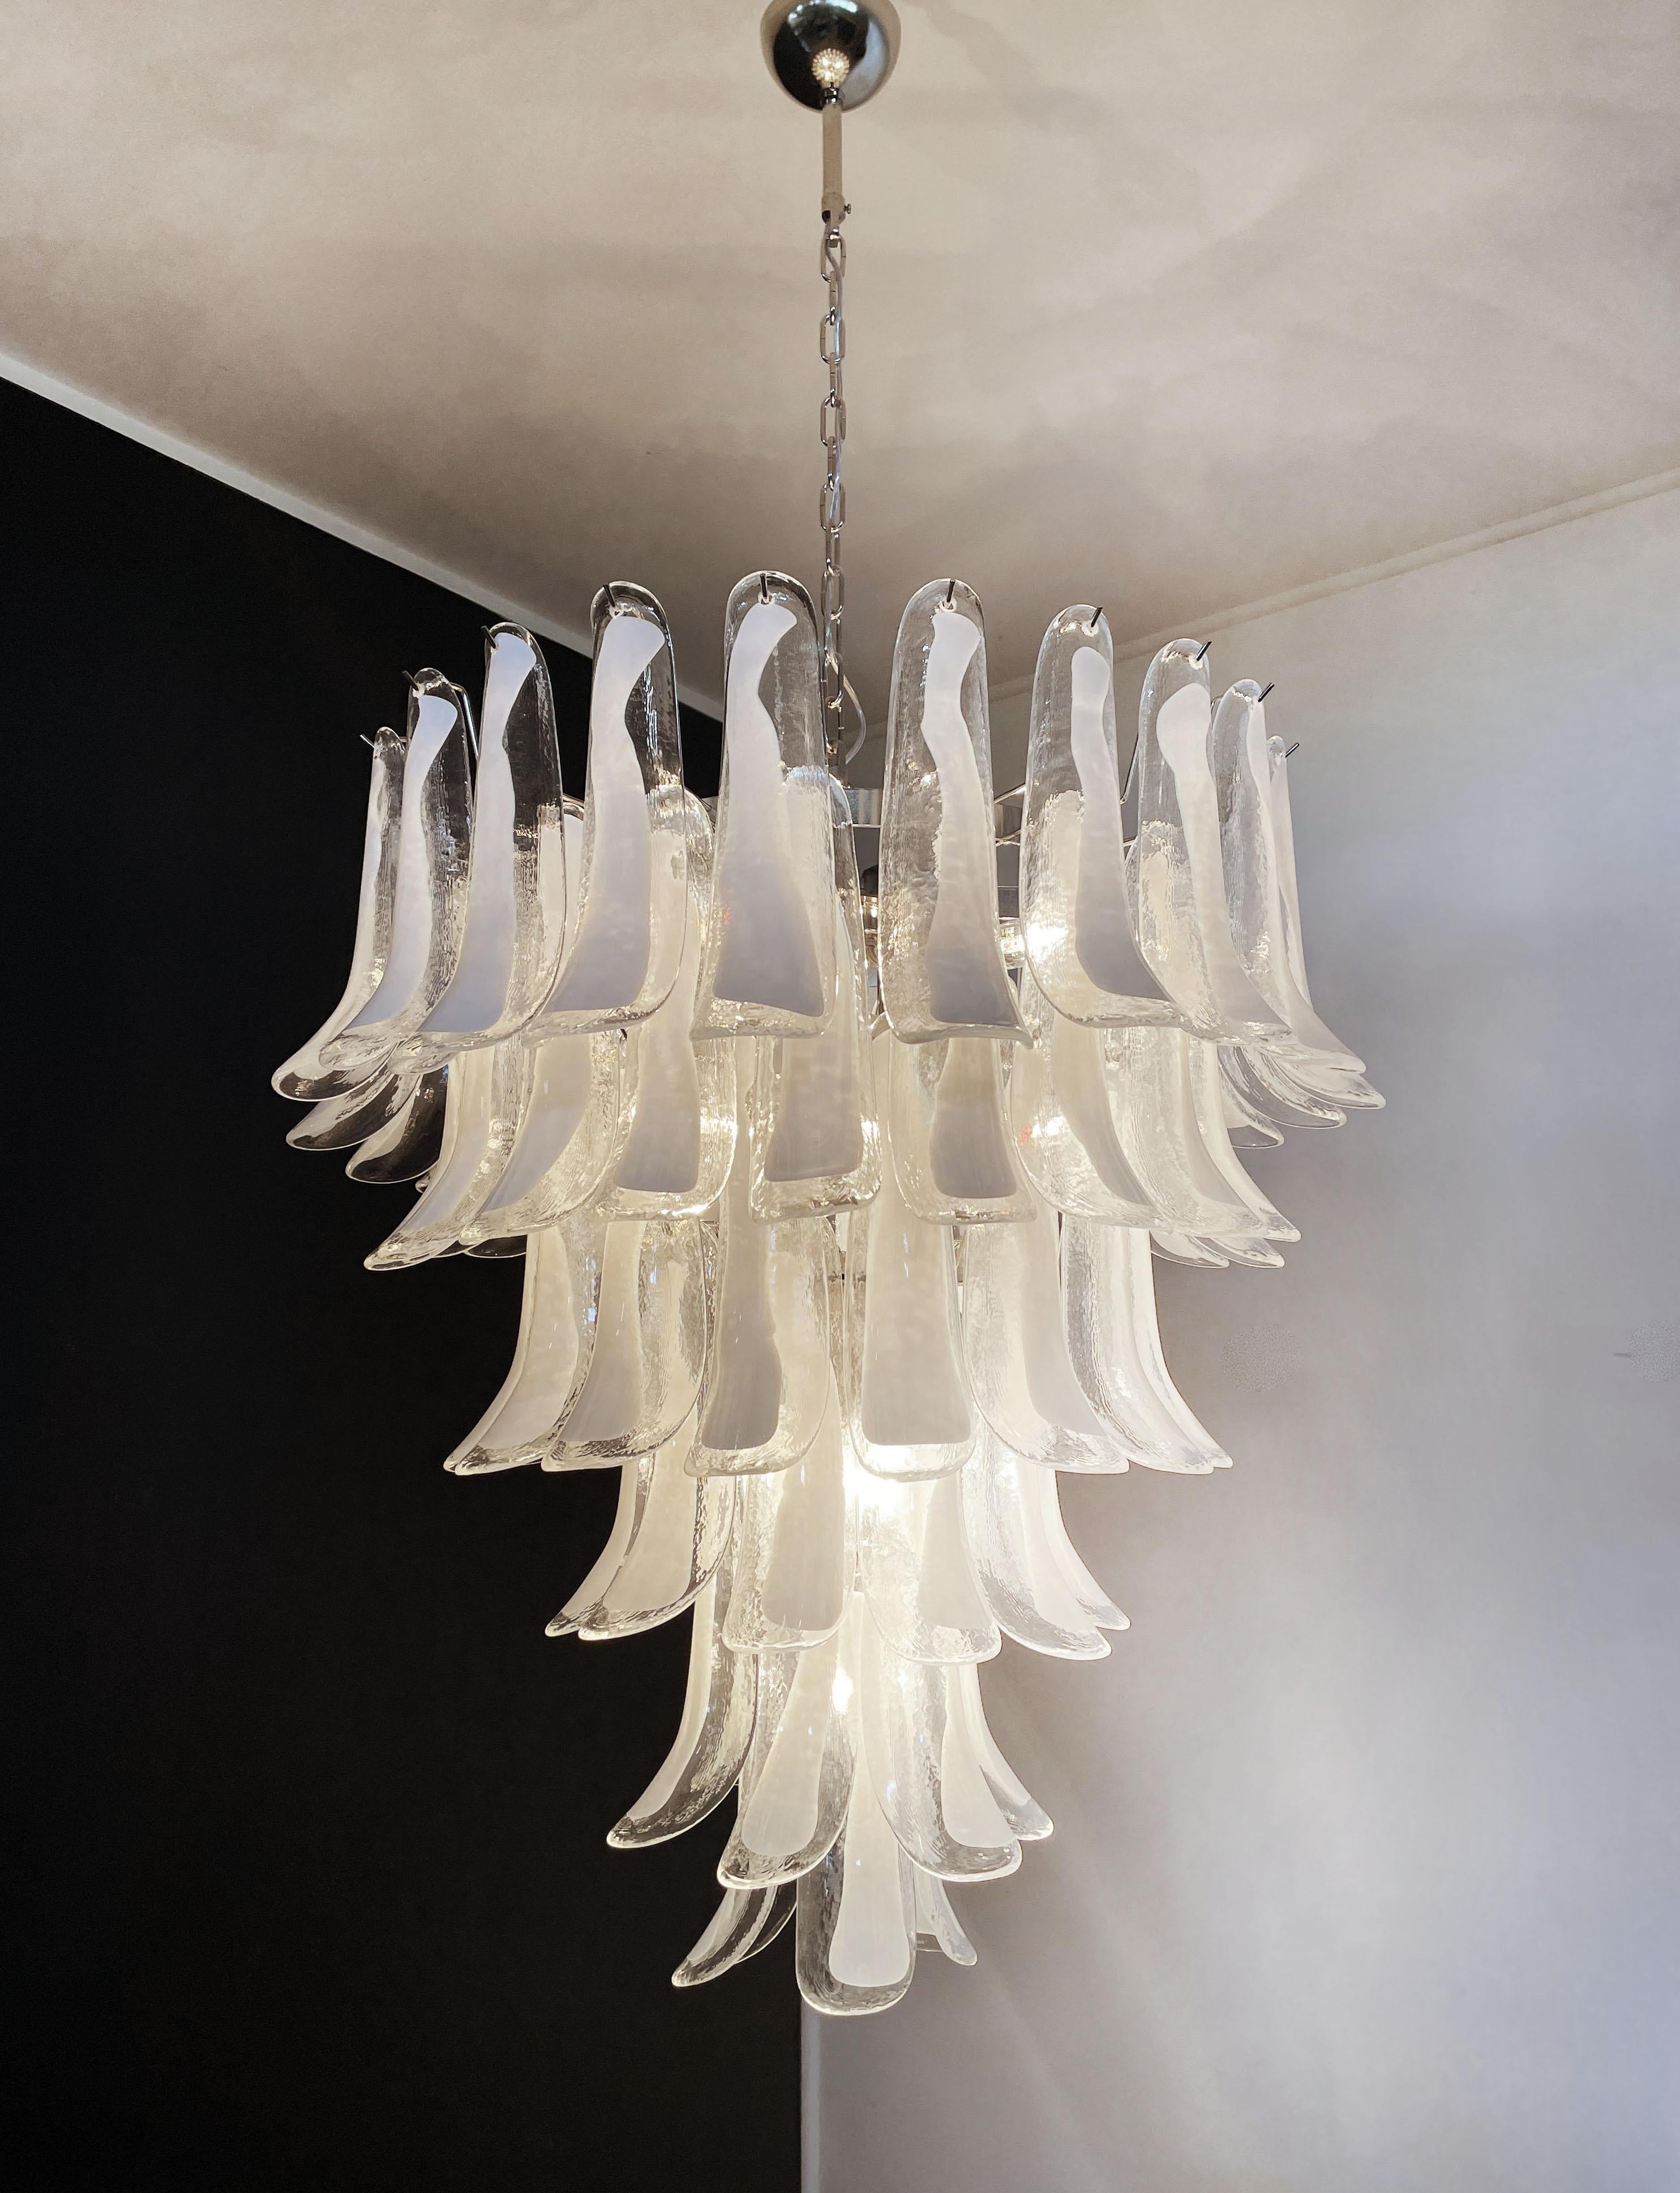 Italian vintage Murano chandelier in the manner of Mazzega - 75 glass petals For Sale 10